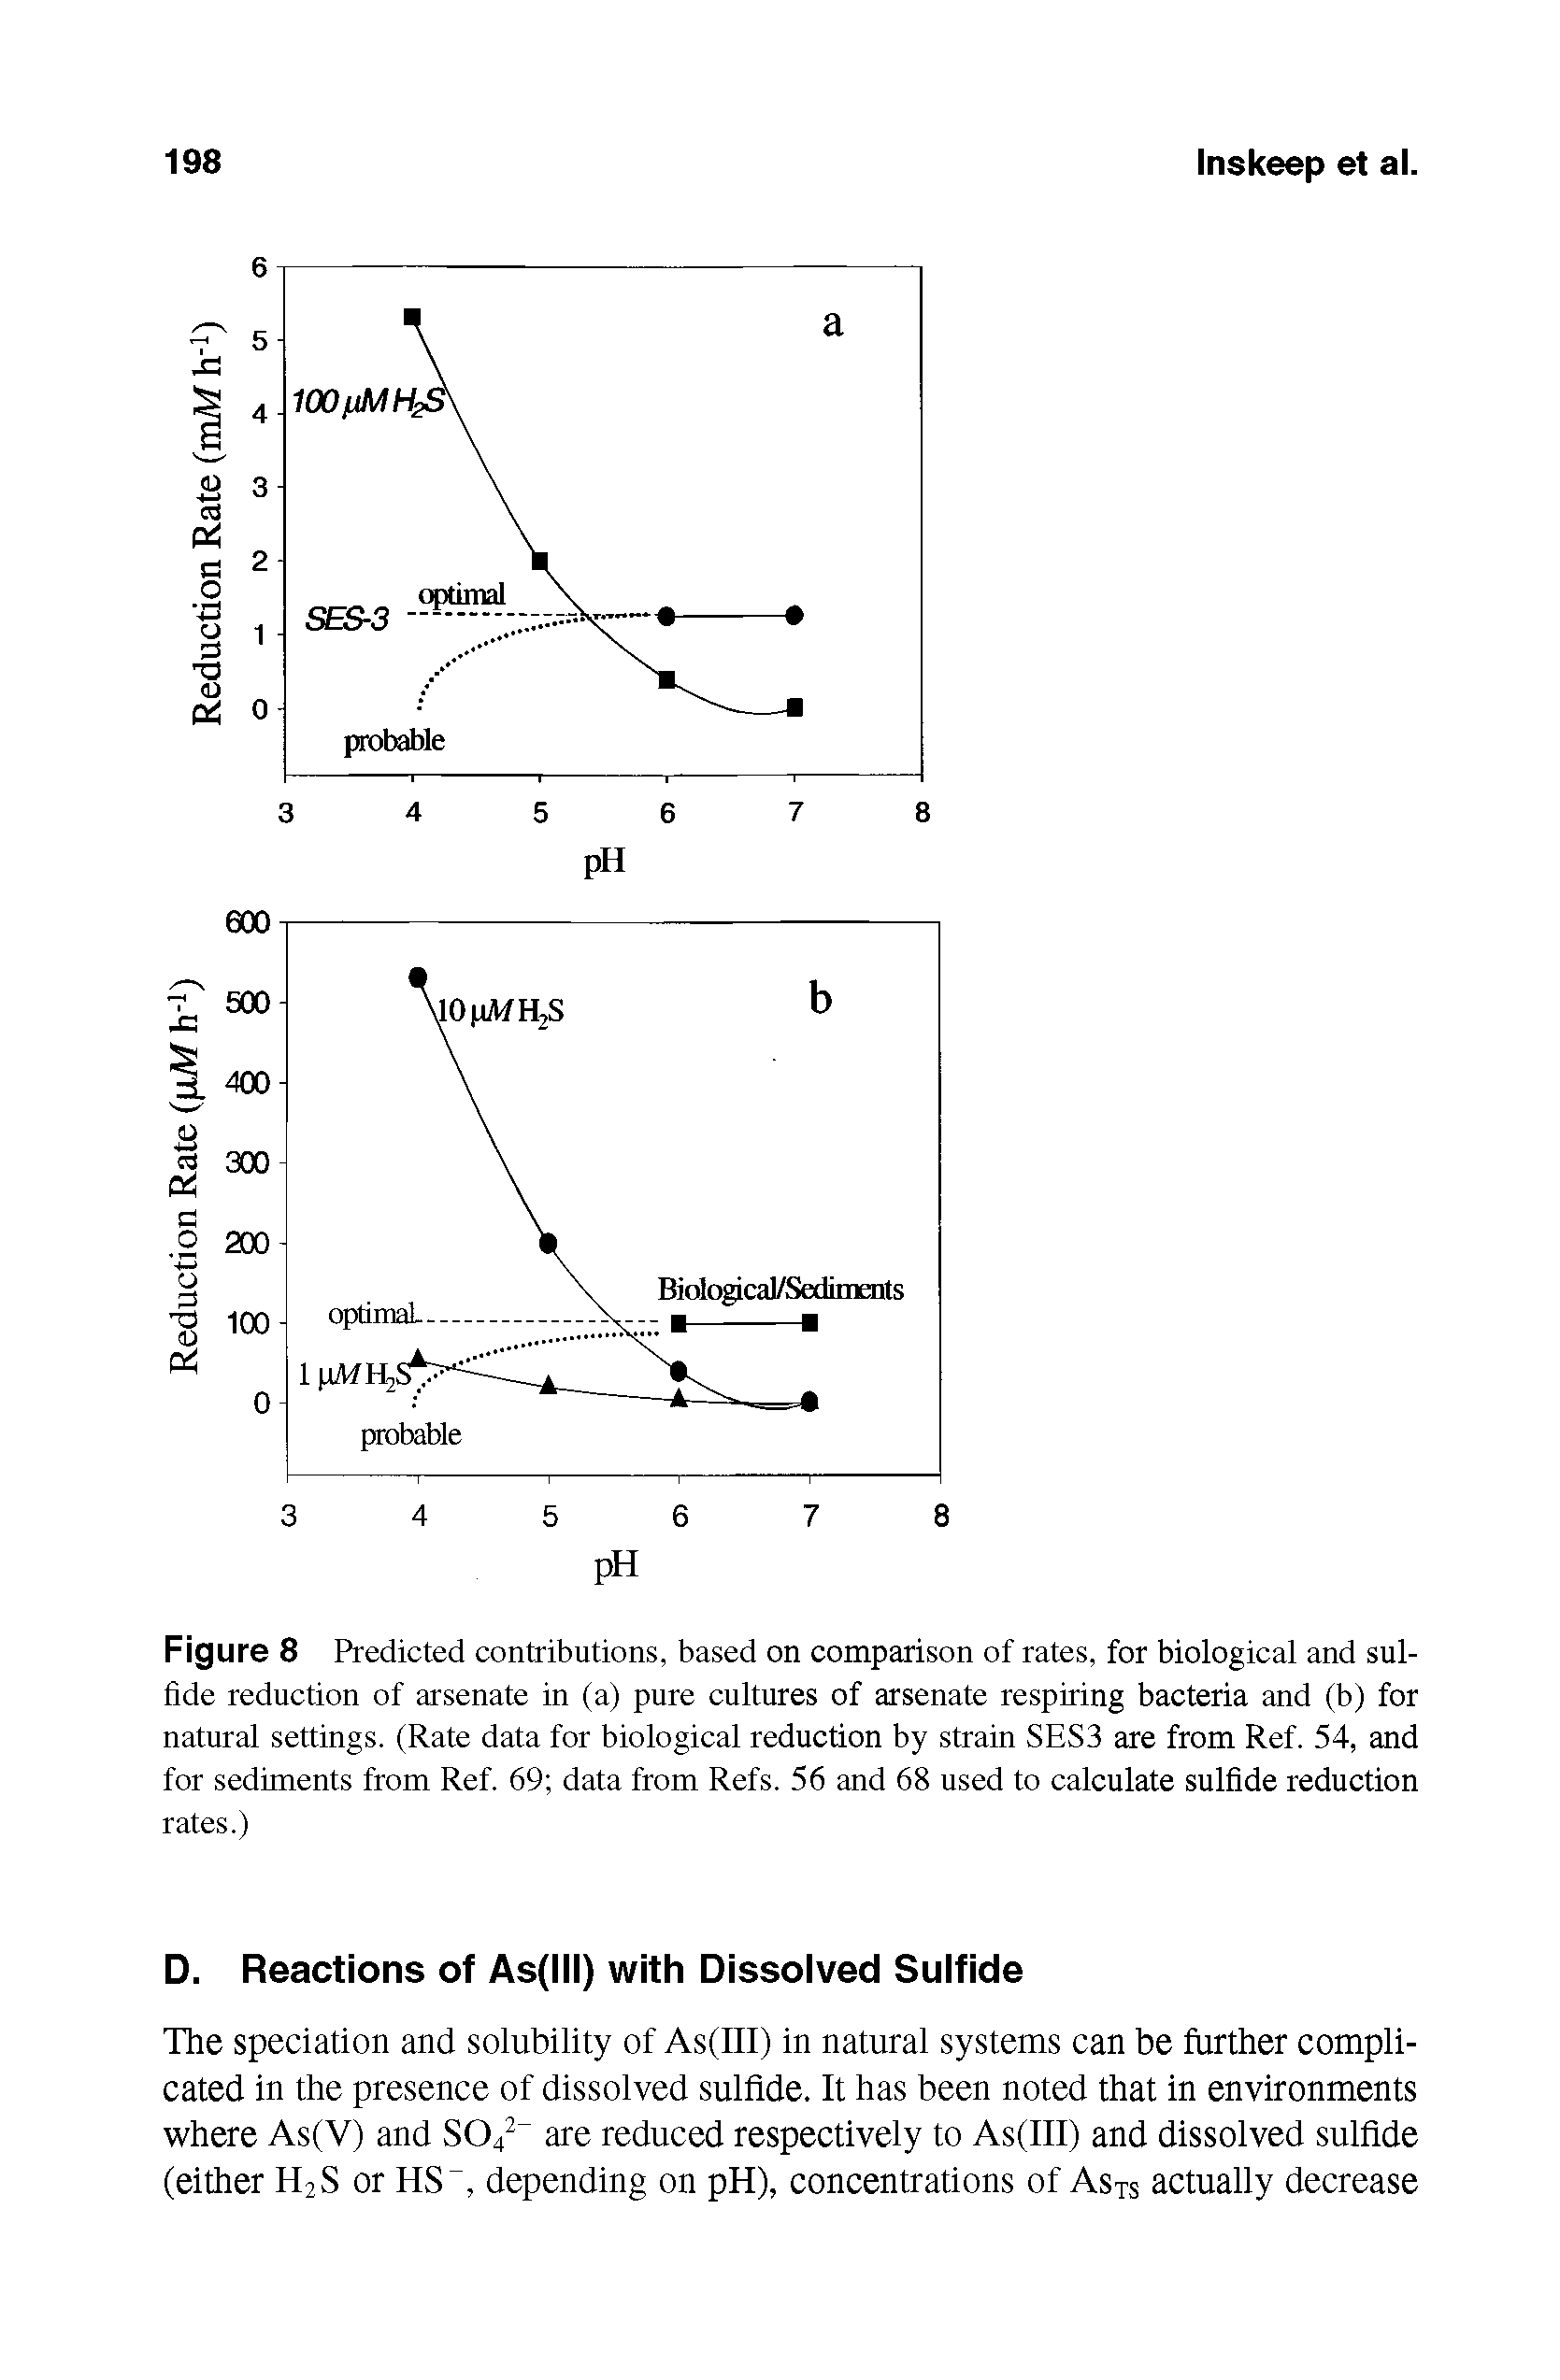 Figure 8 Predicted contributions, based on comparison of rates, for biological and sulfide reduction of arsenate in (a) pure cultures of arsenate respiring bacteria and (b) for natural settings. (Rate data for biological reduction by strain SES3 are from Ref. 54, and for sediments from Ref. 69 data from Refs. 56 and 68 used to calculate sulfide reduction rates.)...